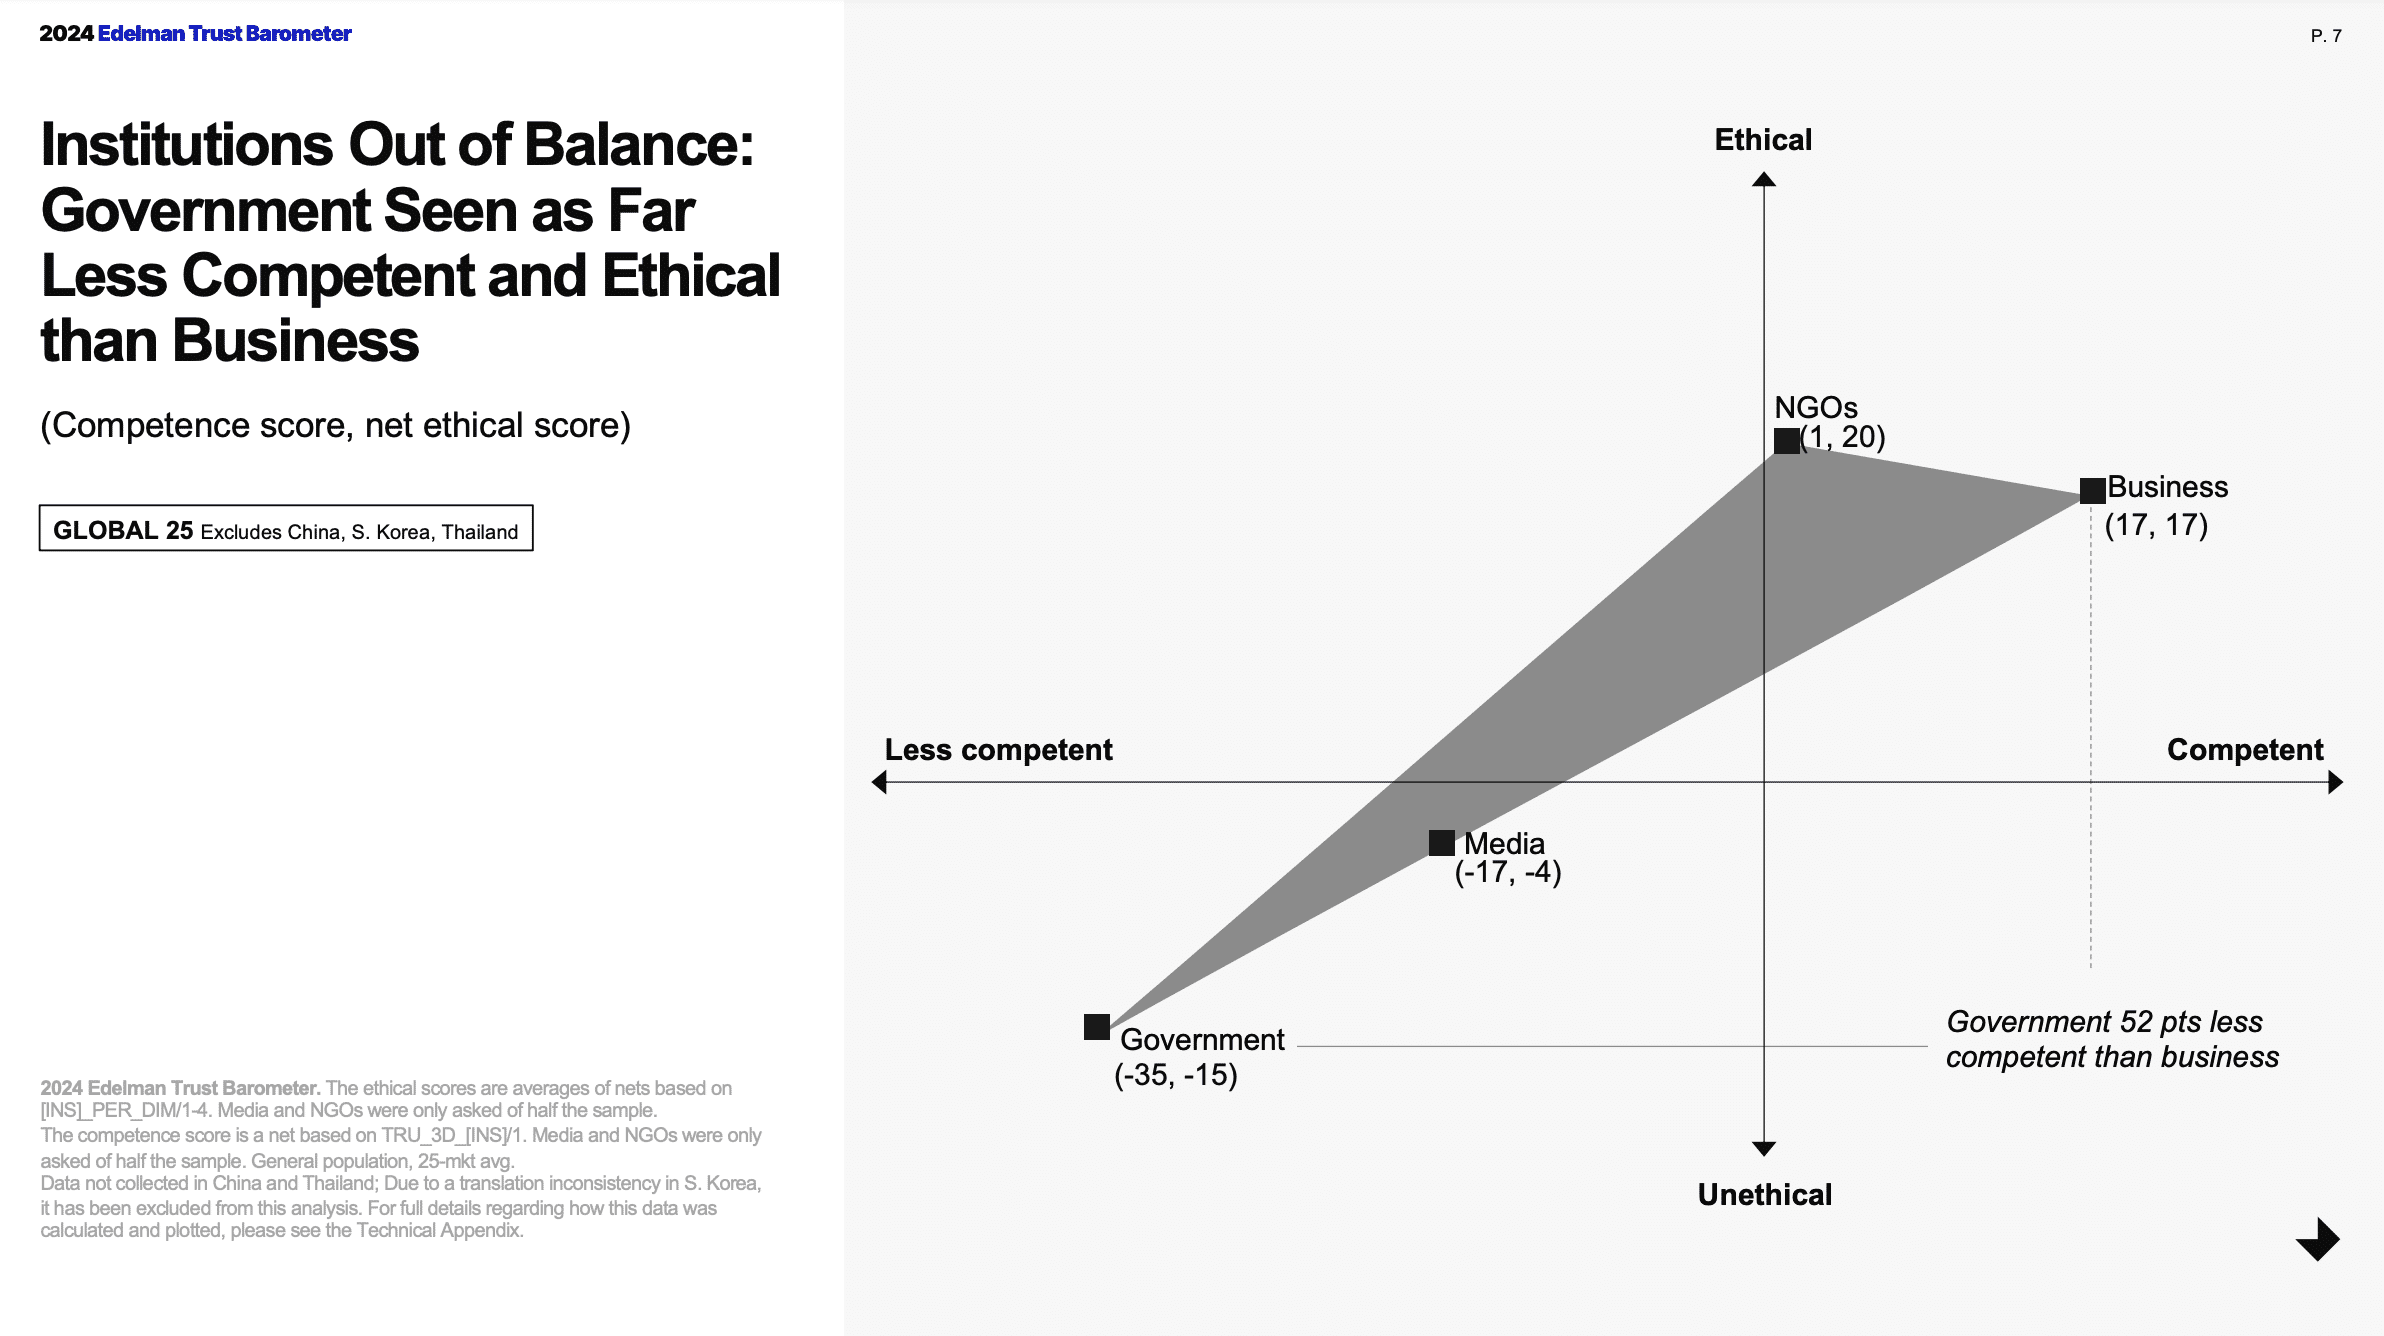 Slide showing the levels of trust across government, NGOs, business, and media, with business viewed as the most competent and second-most ethical behind NGOs